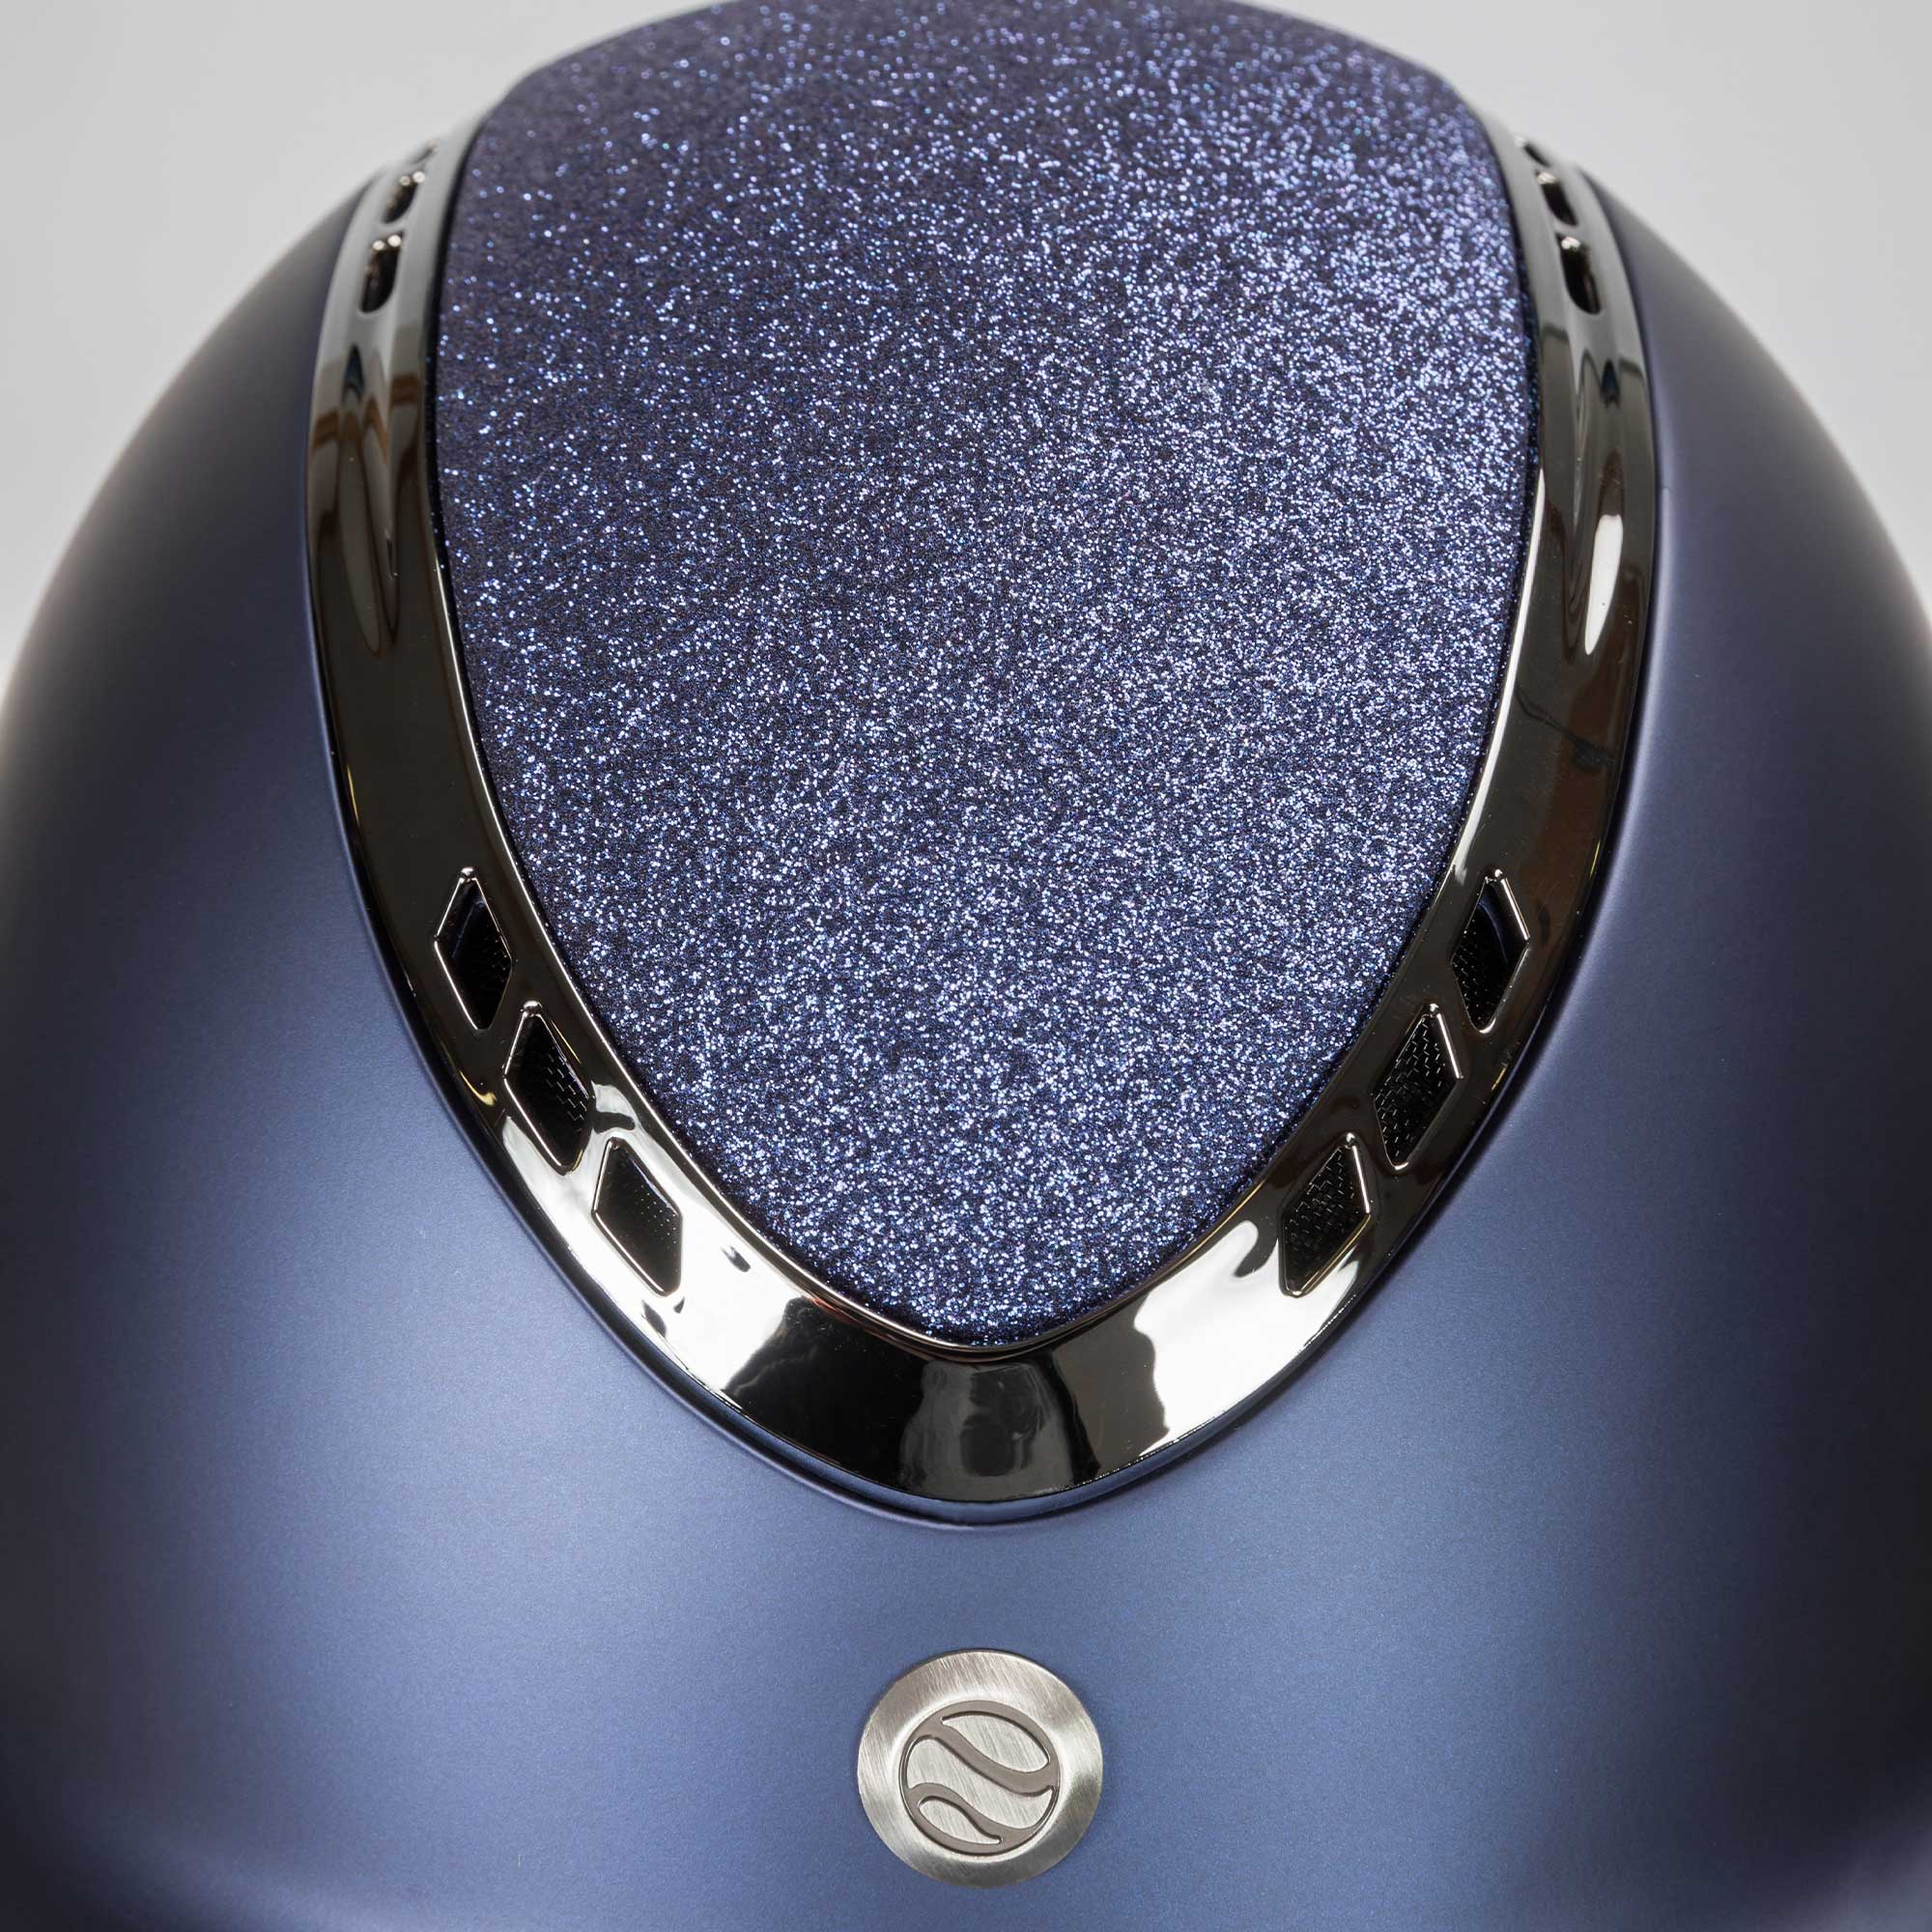 EQ3 "Pardus" Smooth Top with Adjustable Wheel - Blue Sand